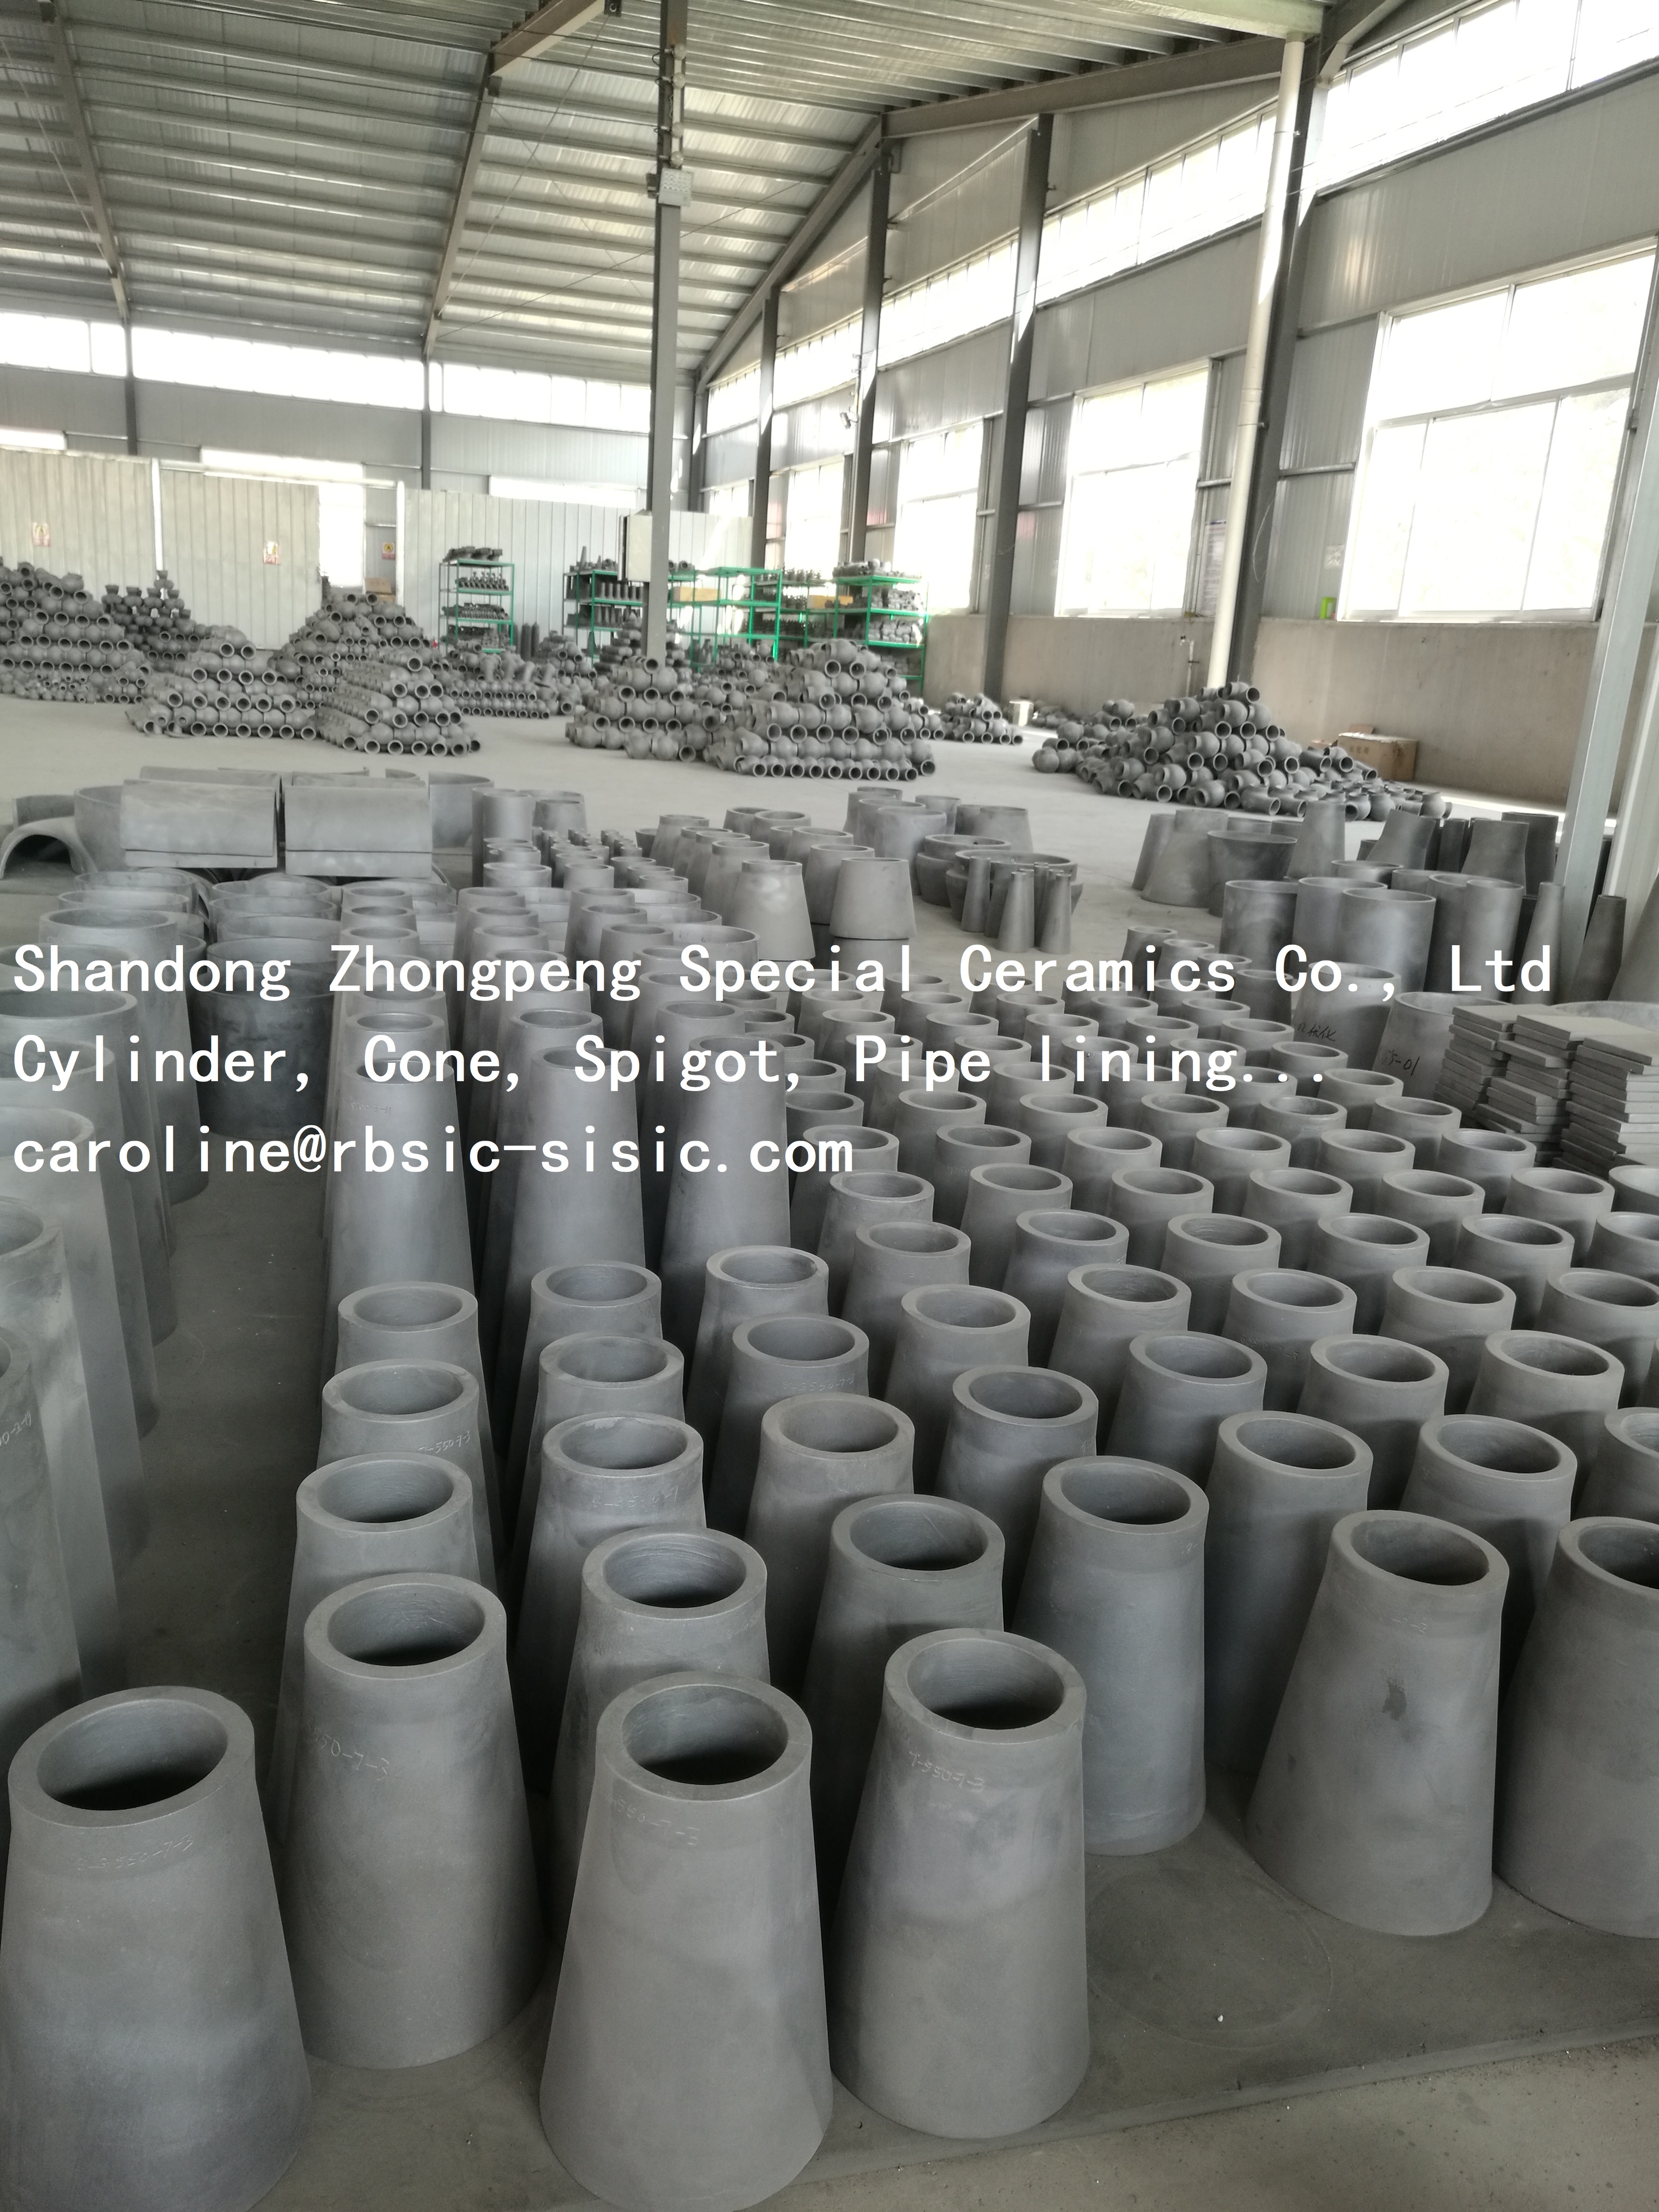 Quots for Wood Central Heating Stove -
 Silicon carbide SiC cylinder, cone, spigot – ZhongPeng